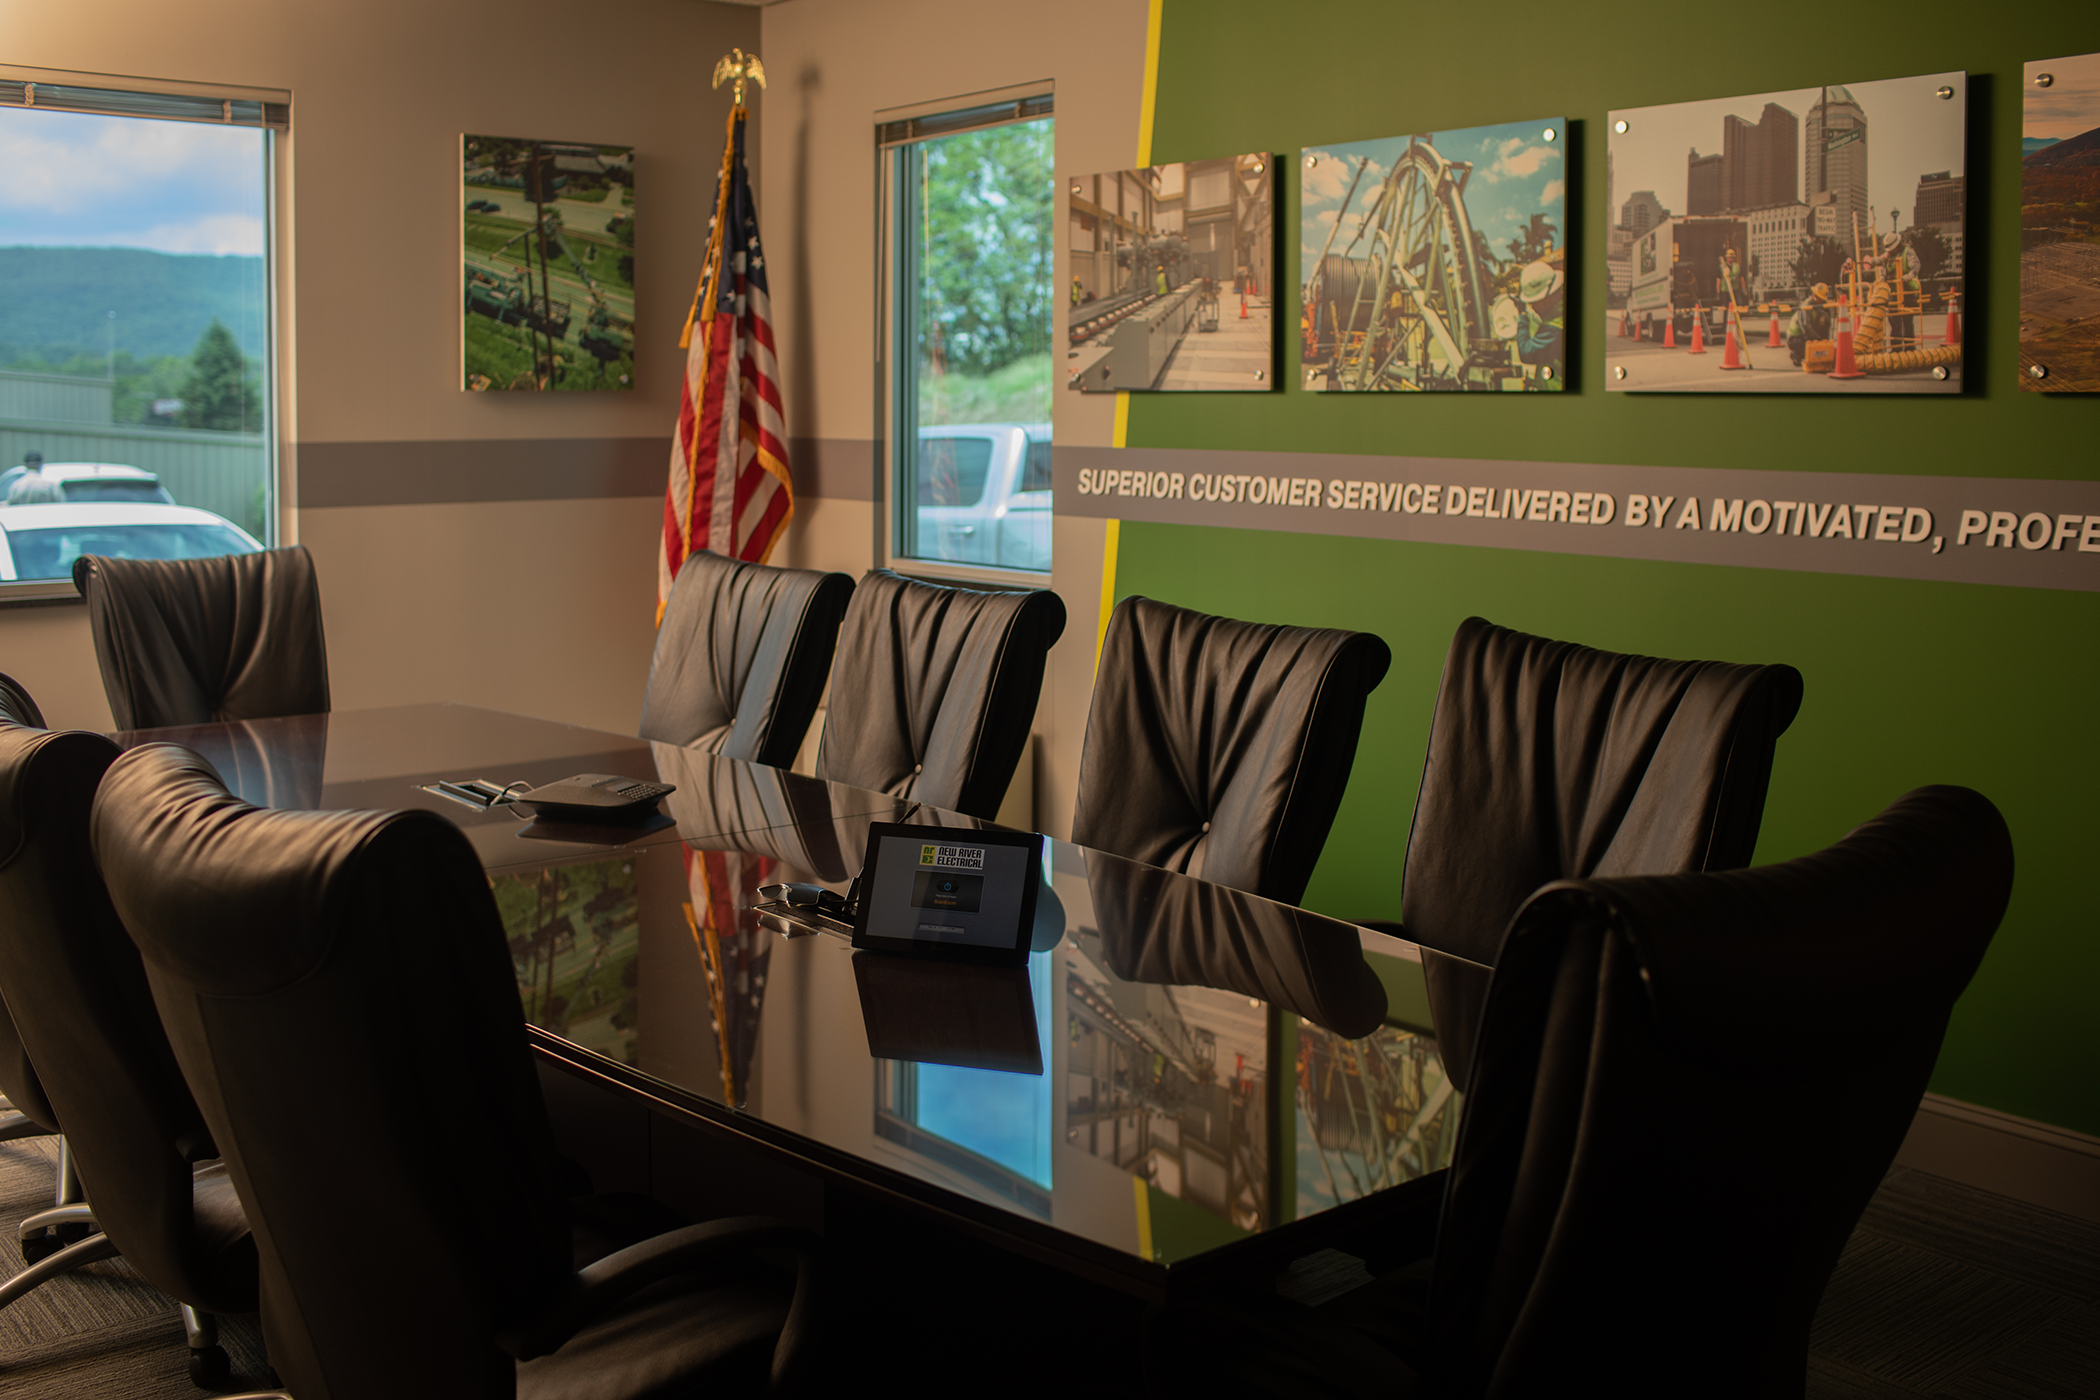 A conference room with a large table and leather chairs, an American flag, and a wall decorated with photos and a statement about customer service.